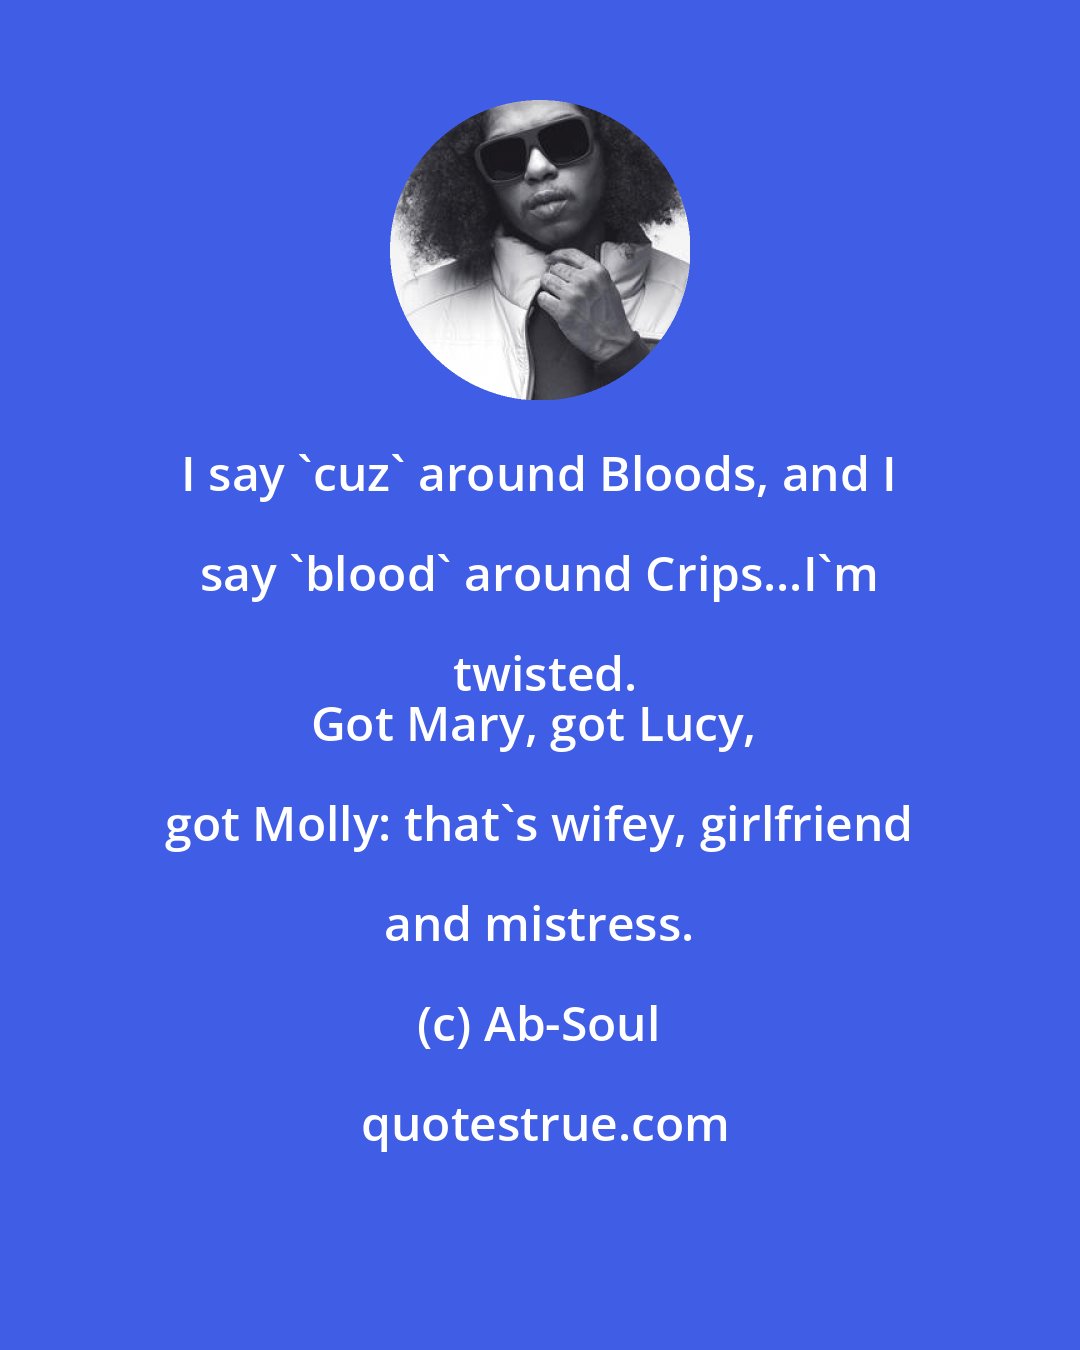 Ab-Soul: I say 'cuz' around Bloods, and I say 'blood' around Crips...I'm twisted.
Got Mary, got Lucy, got Molly: that's wifey, girlfriend and mistress.